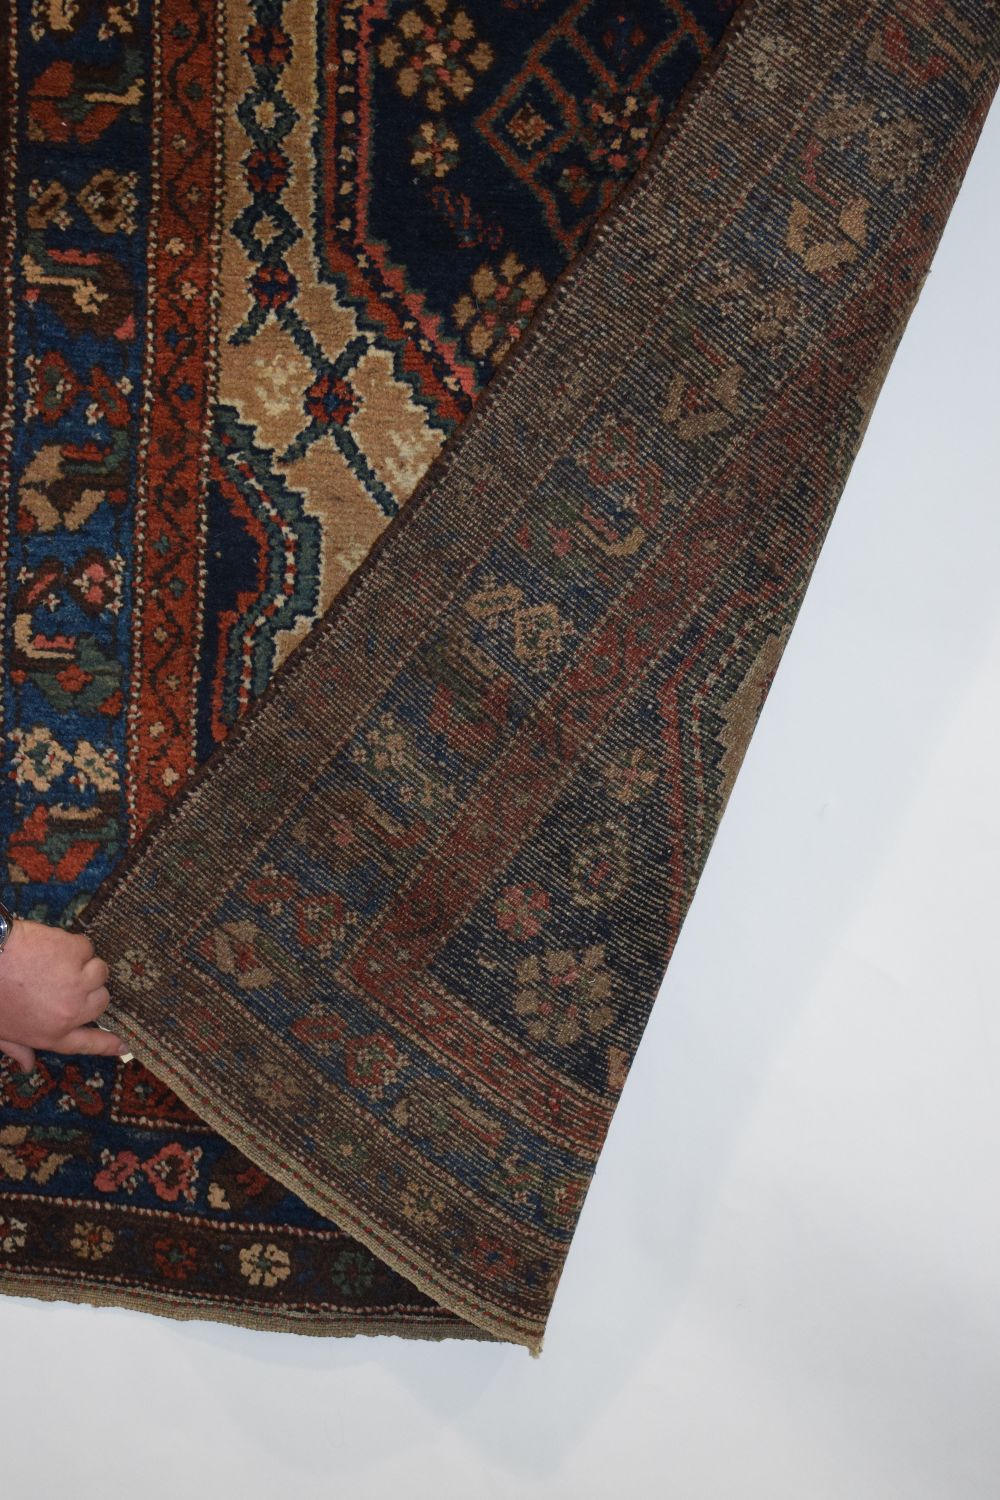 Attractive Sarab rug, Hamadan area, north west Persia, circa 1920s, 6ft. 6in. x 3ft. 9in. 1.98m. x - Image 8 of 8